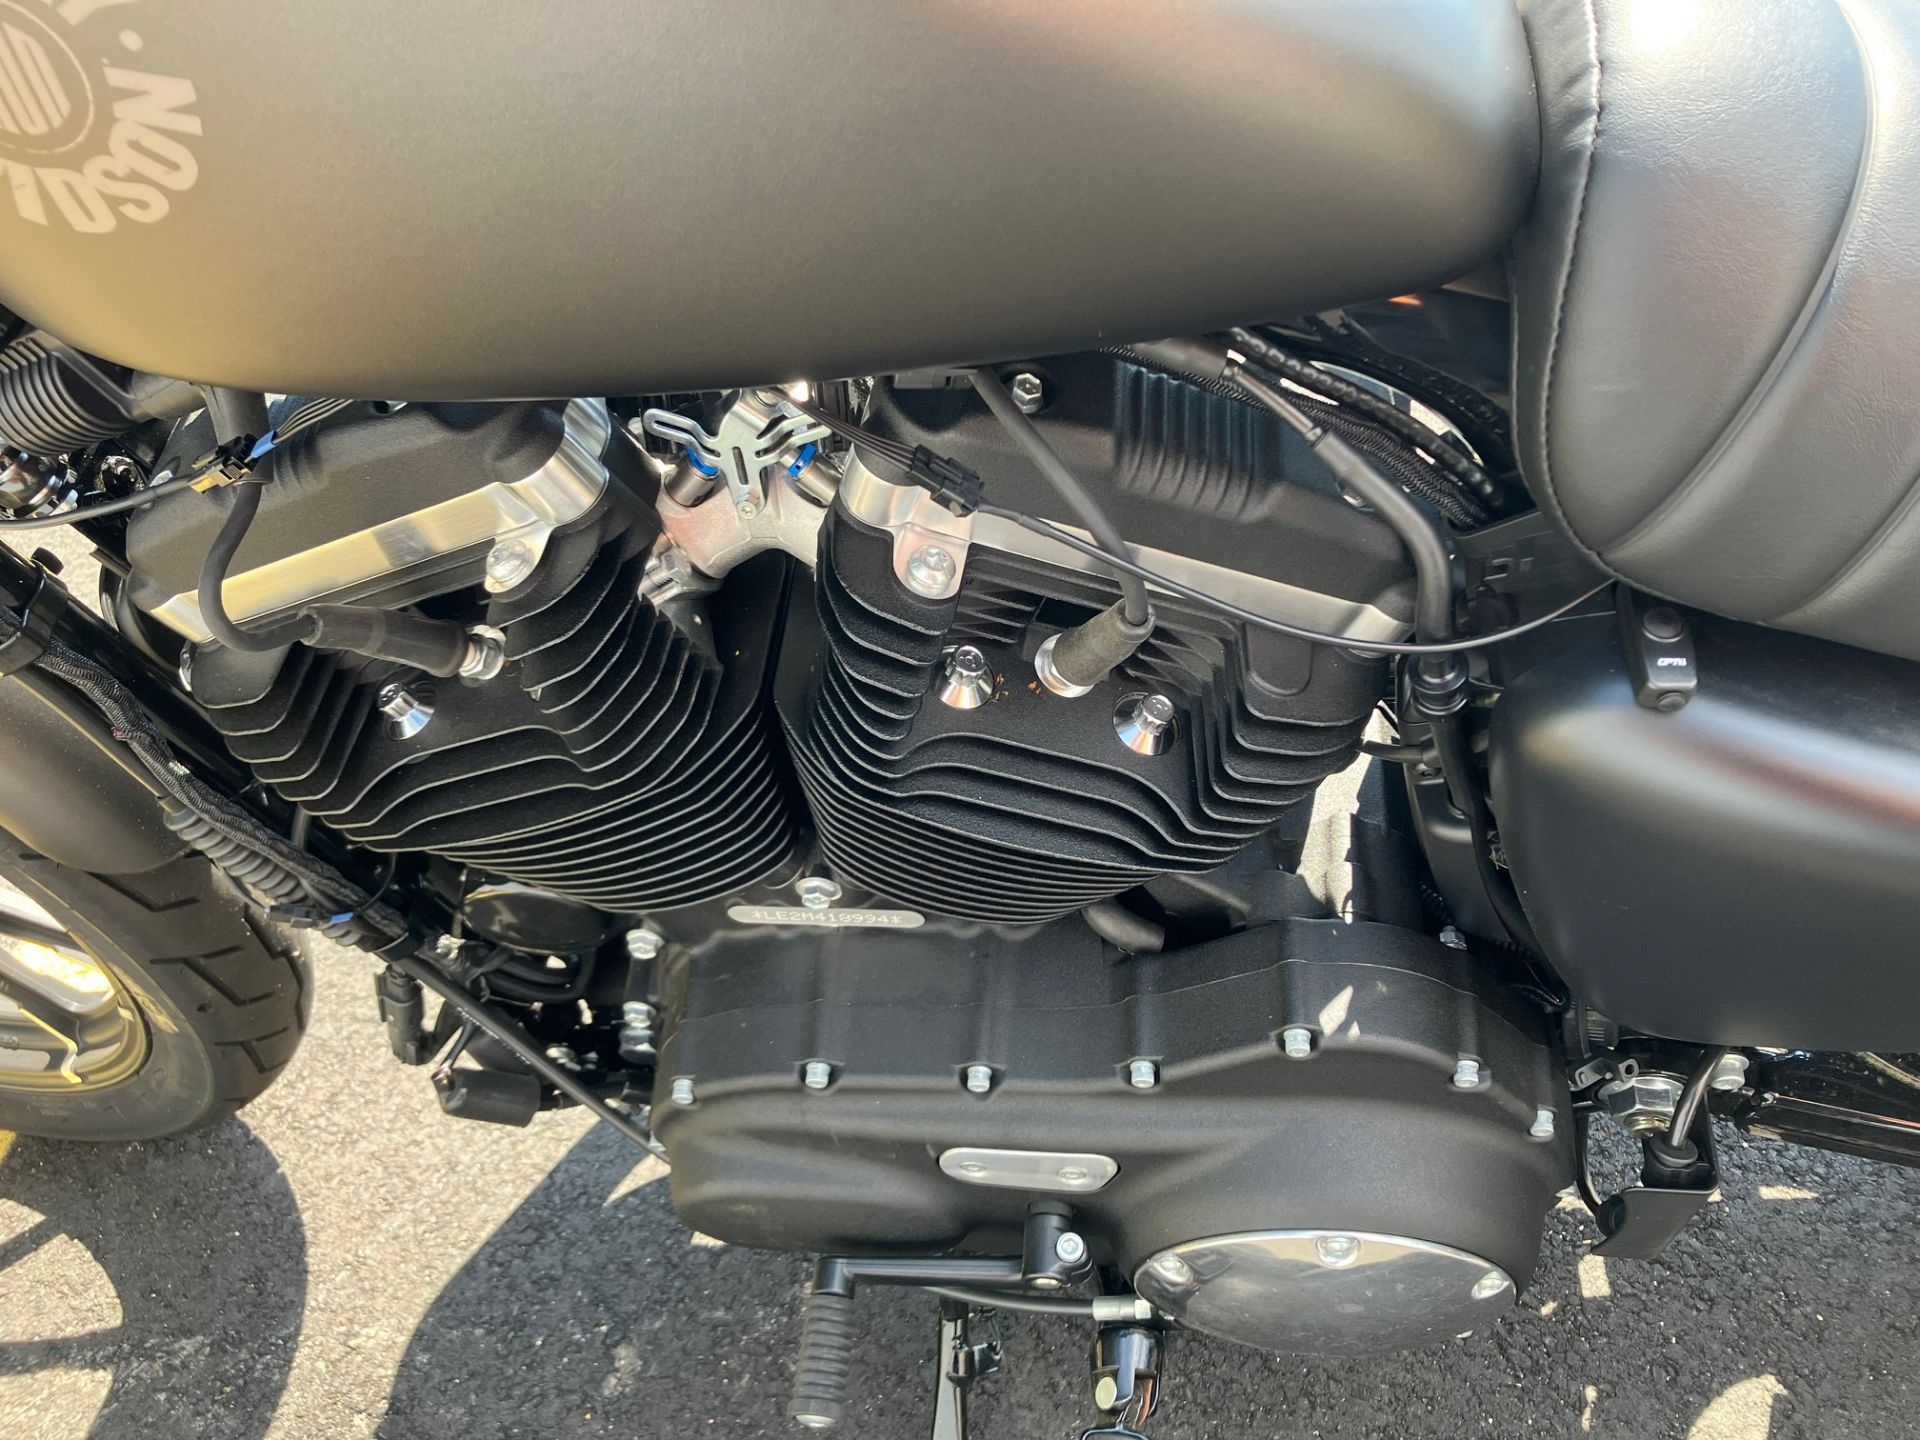 2021 Harley-Davidson IRON 883 in West Long Branch, New Jersey - Photo 10